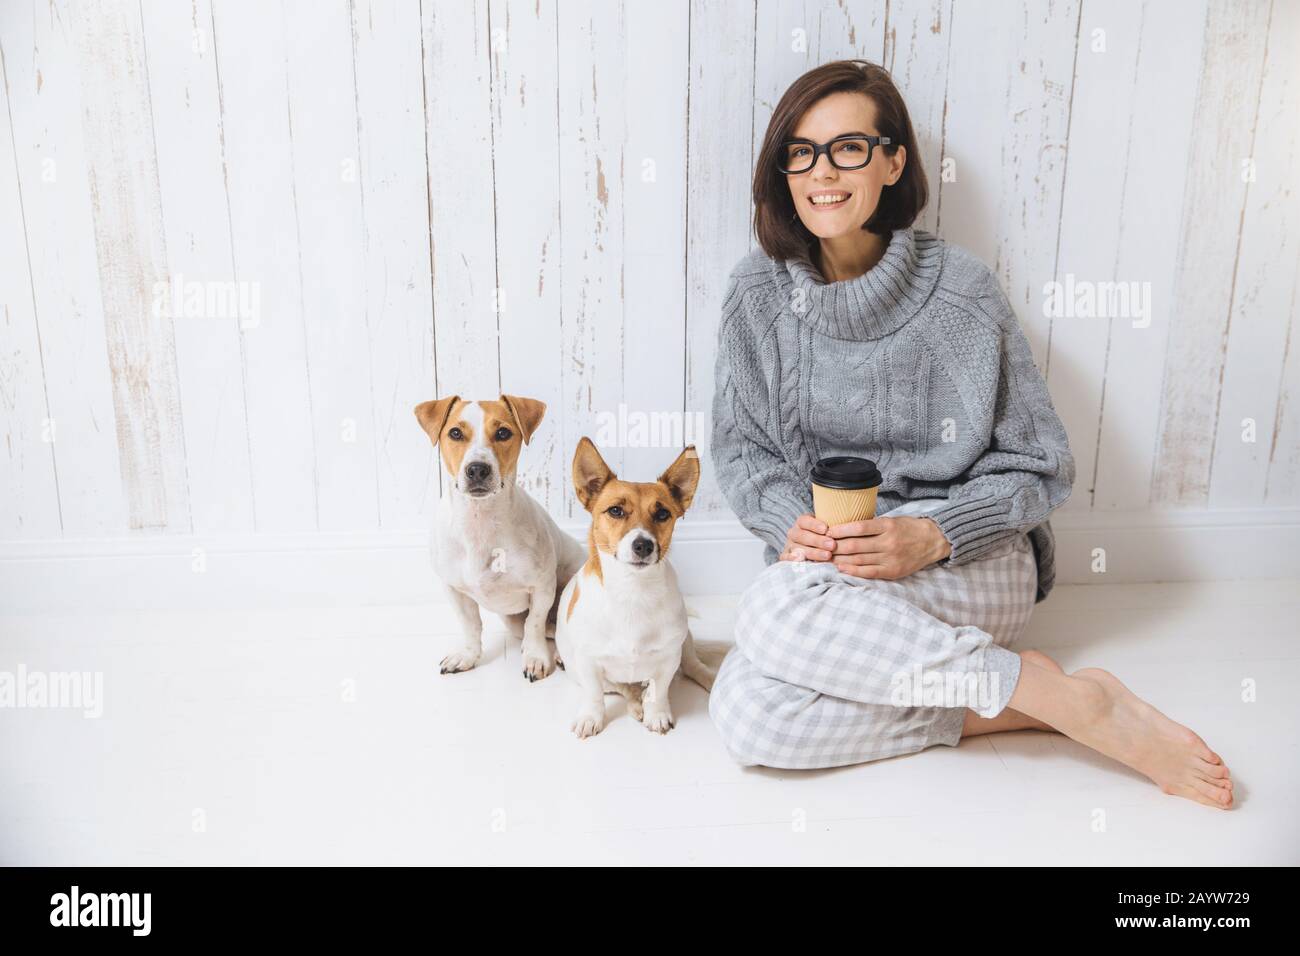 Beautiful brunette woman sits on floor with her two favourite dogs, dressed casually, drinks takeaway coffee. Pleased female enjoys calm domestic atmo Stock Photo